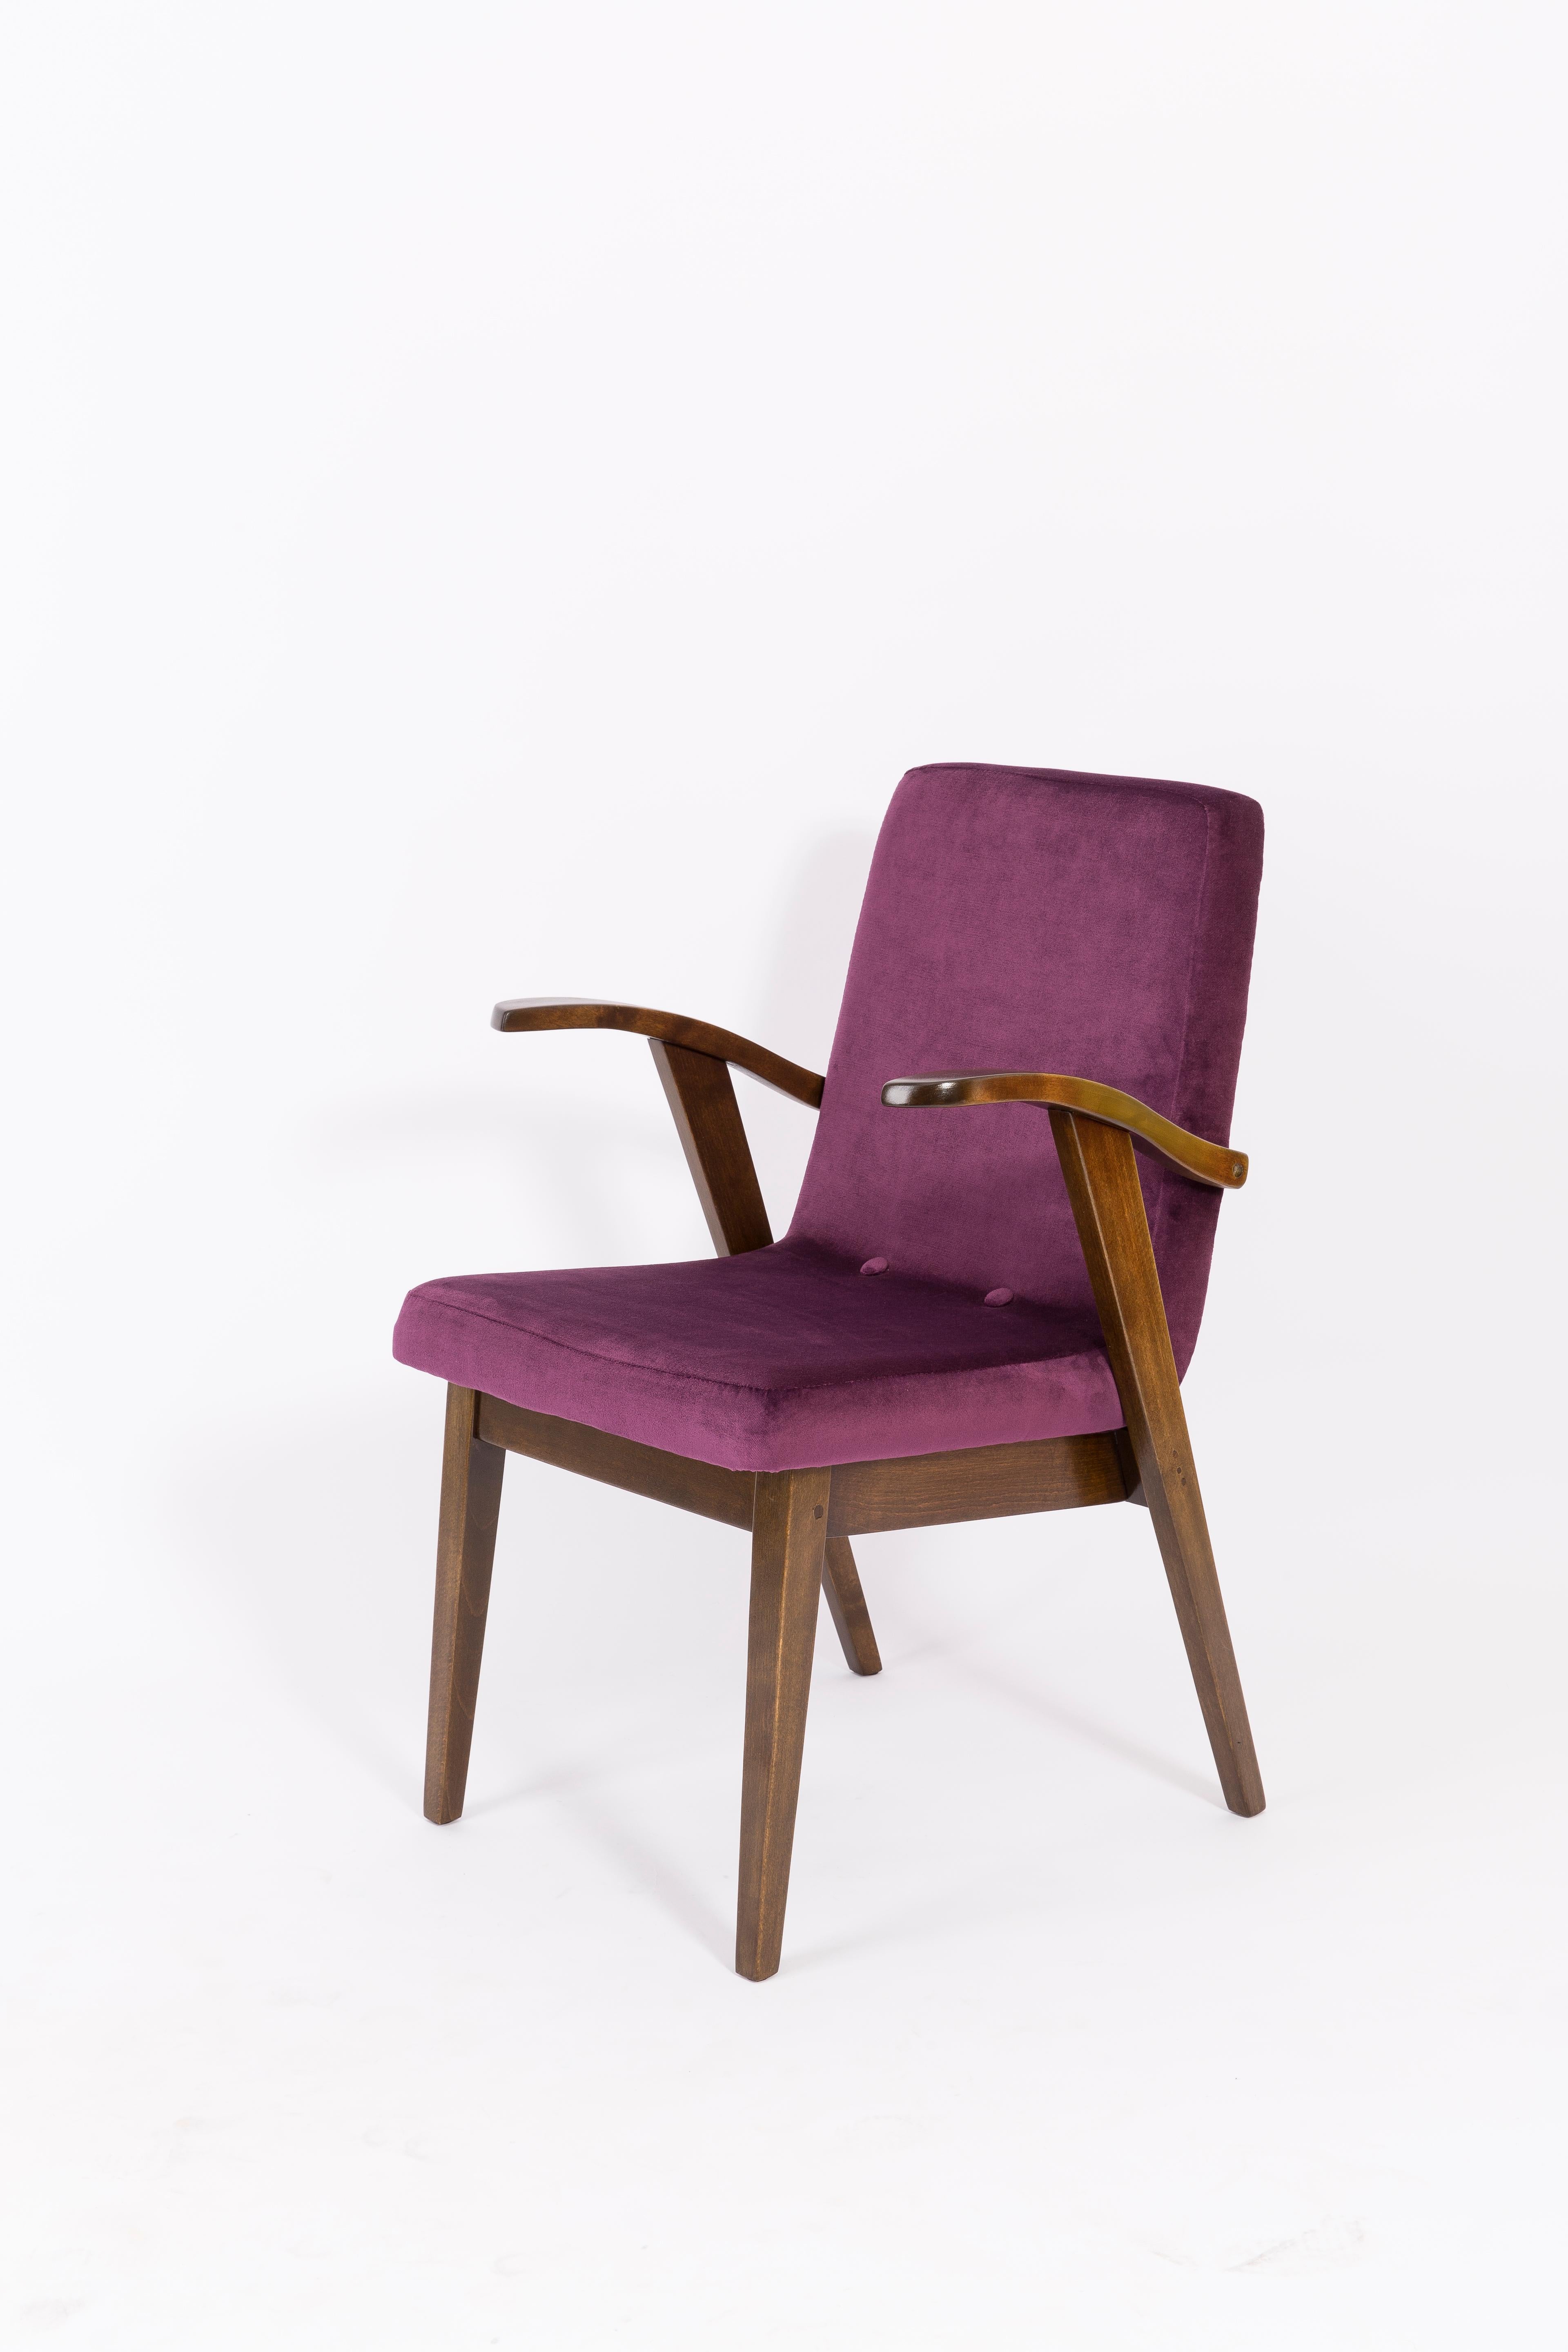 Set of Two 20th Century Vintage Plum Violet Armchair by Mieczyslaw Puchala 1960s For Sale 1